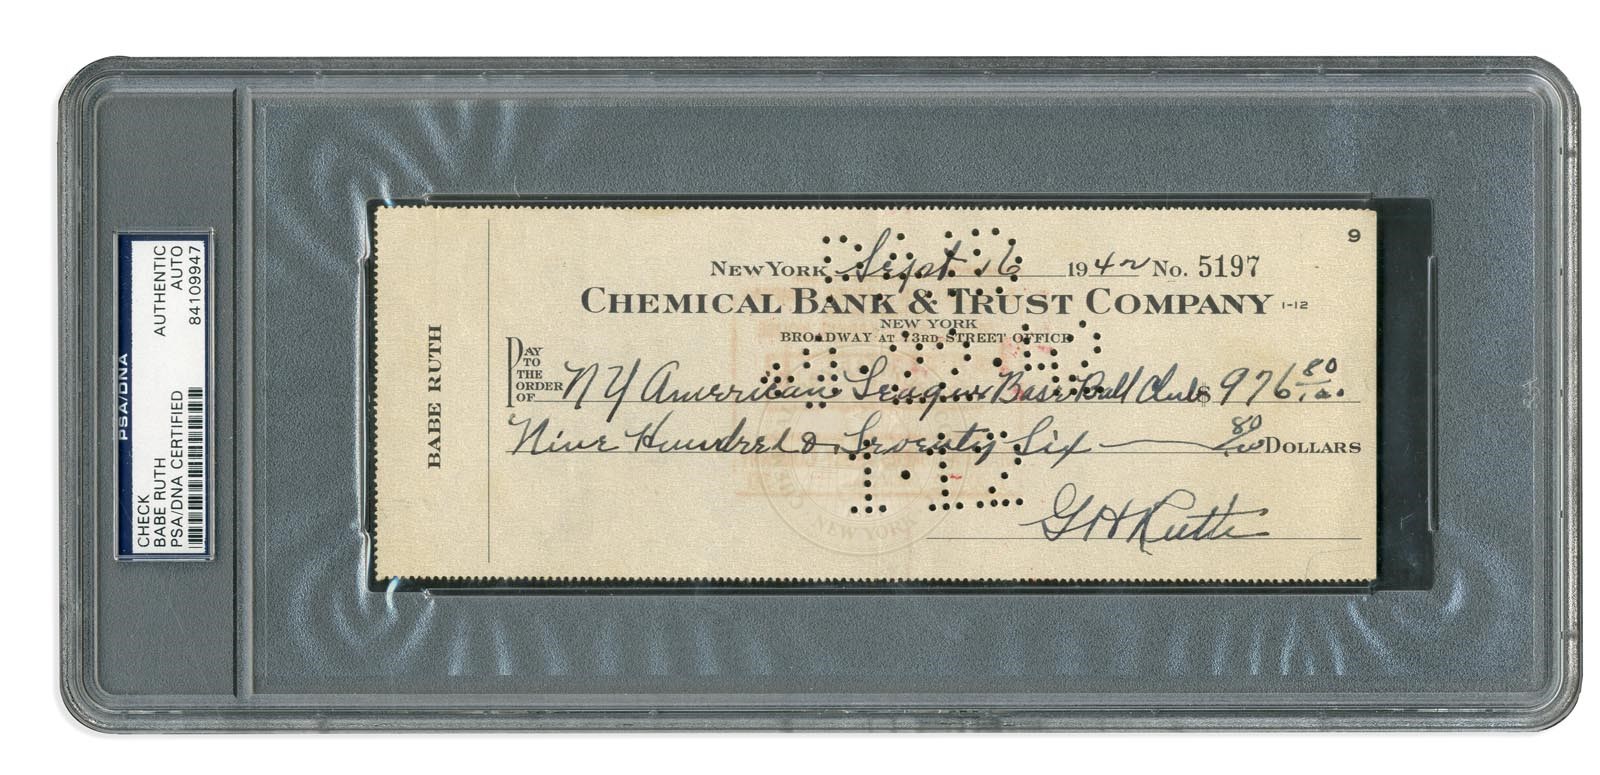 - 1942 Babe Ruth Bank Check Made Out To The New York Yankees (PSA)